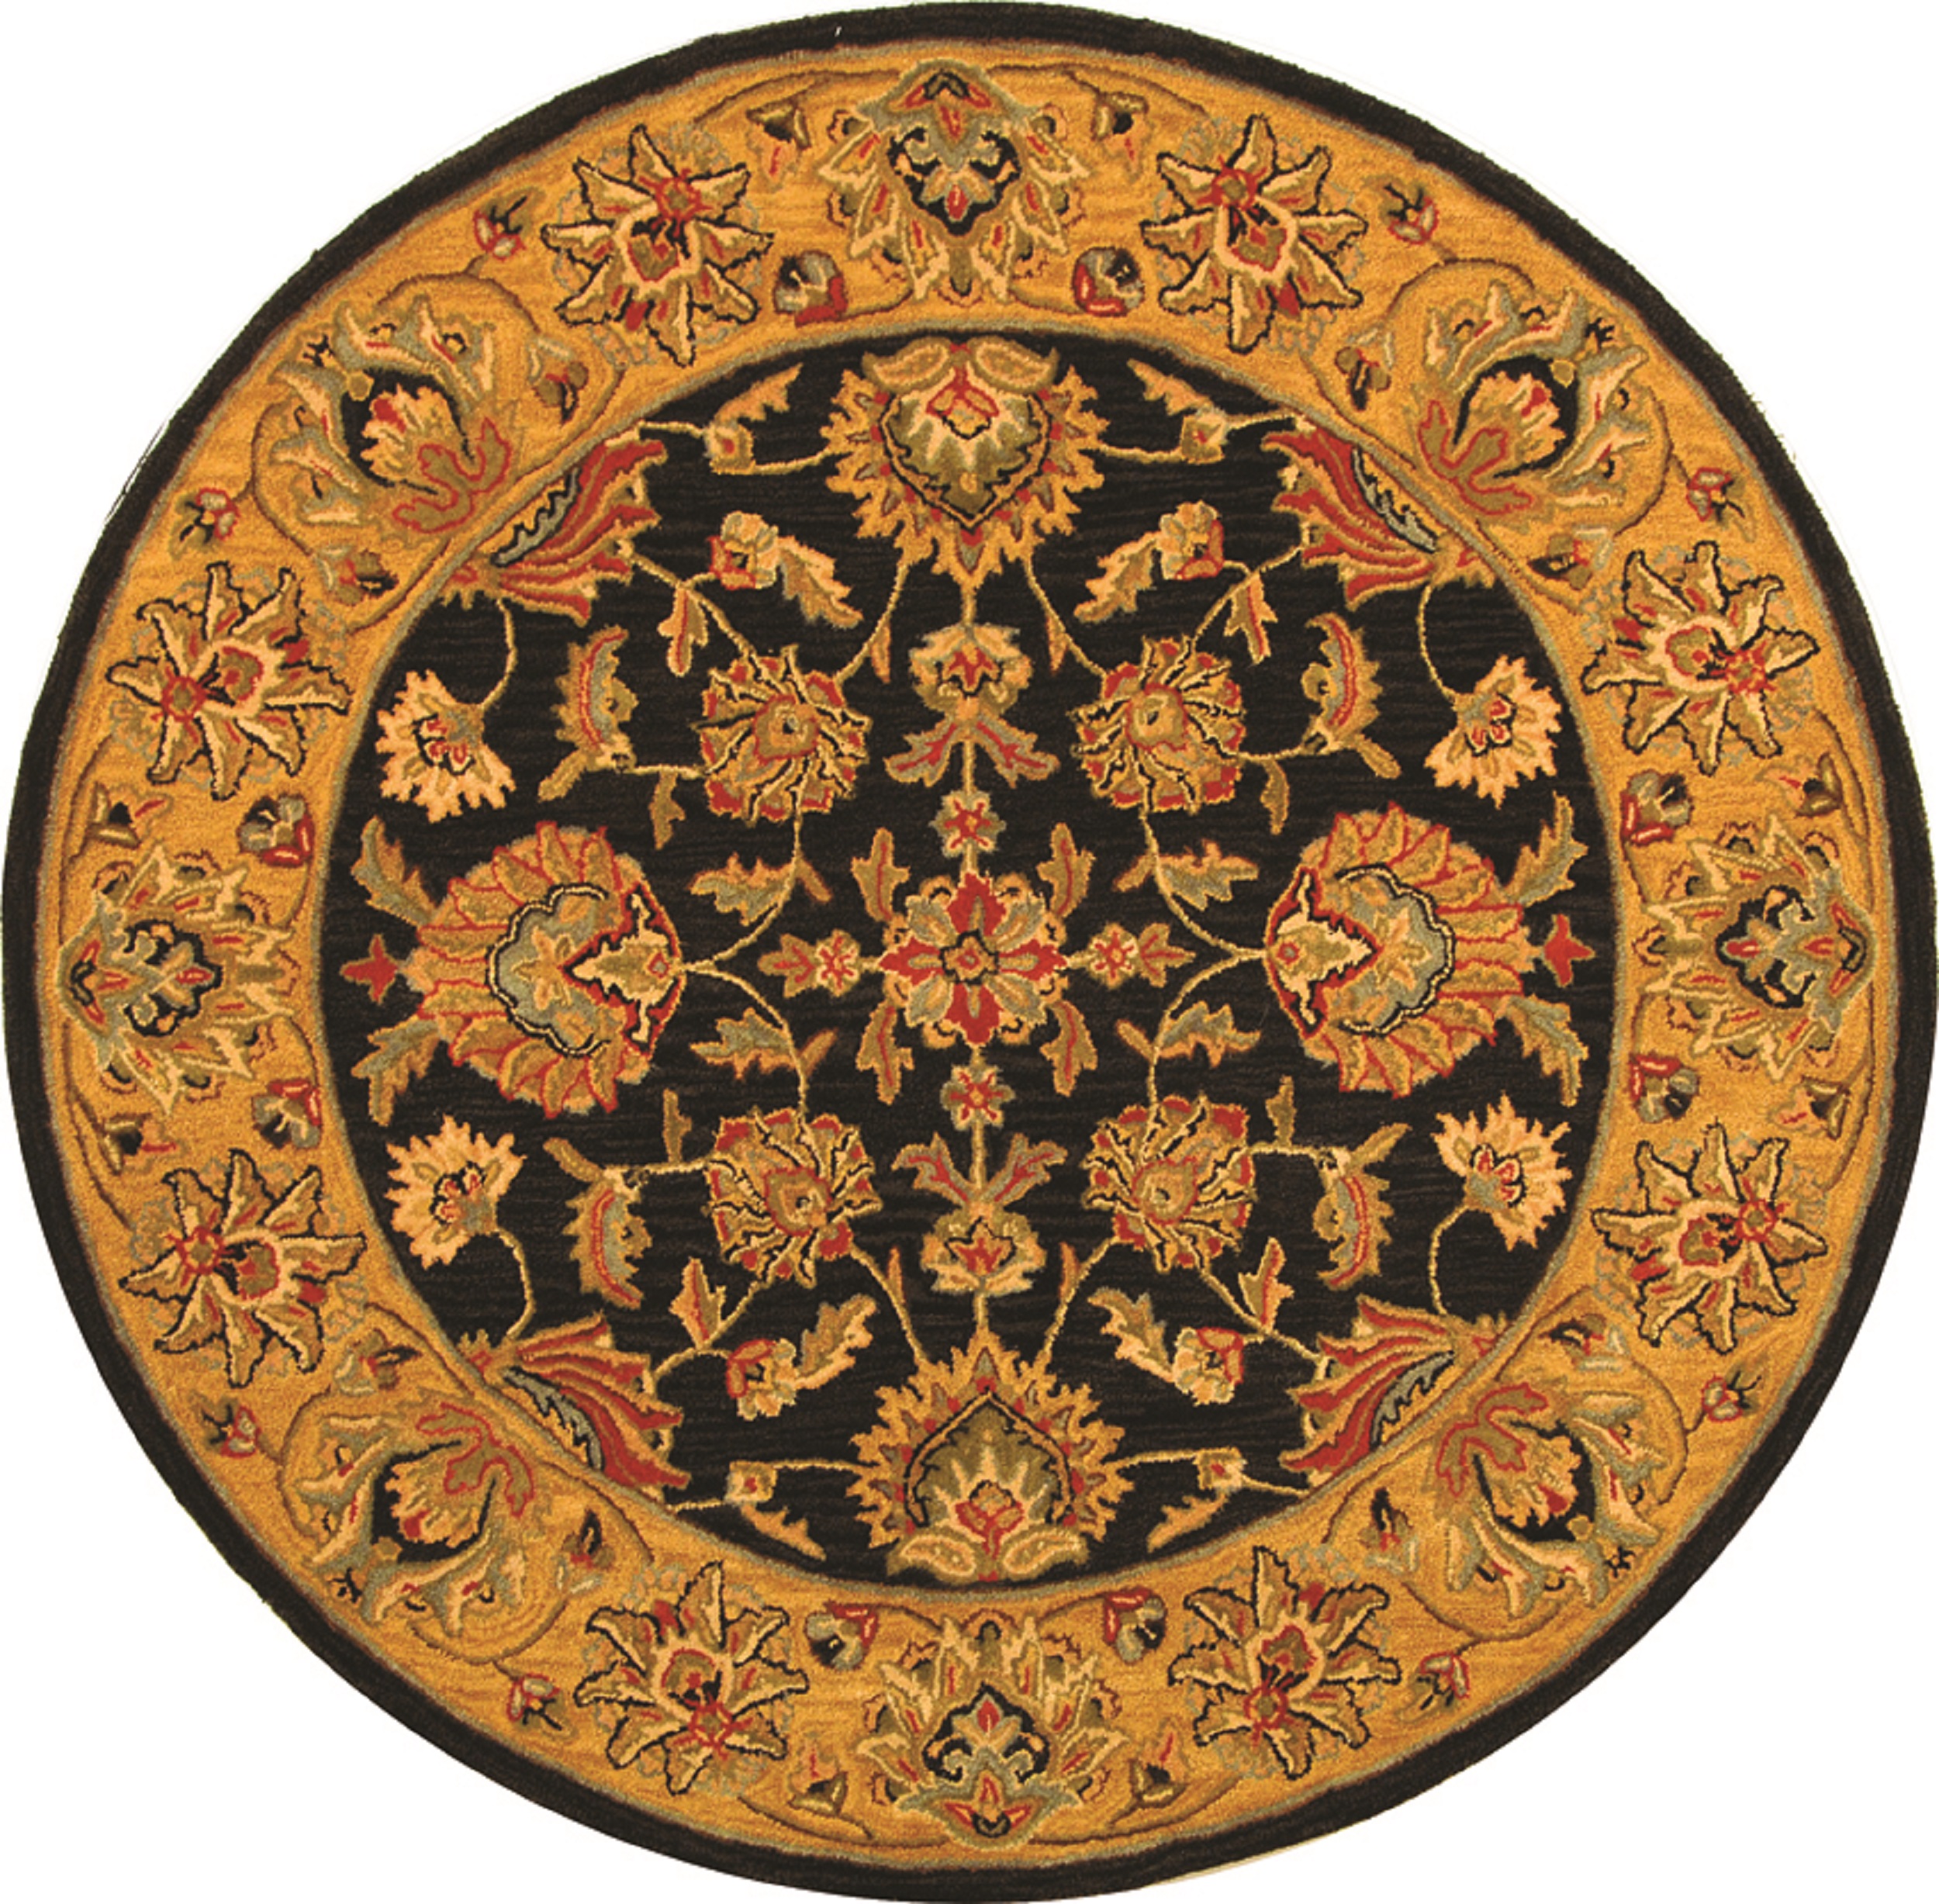 SAFAVIEH Heritage Regis Traditional Wool Area Rug, Charcoal/Gold, 8' x 8' Round - image 1 of 4